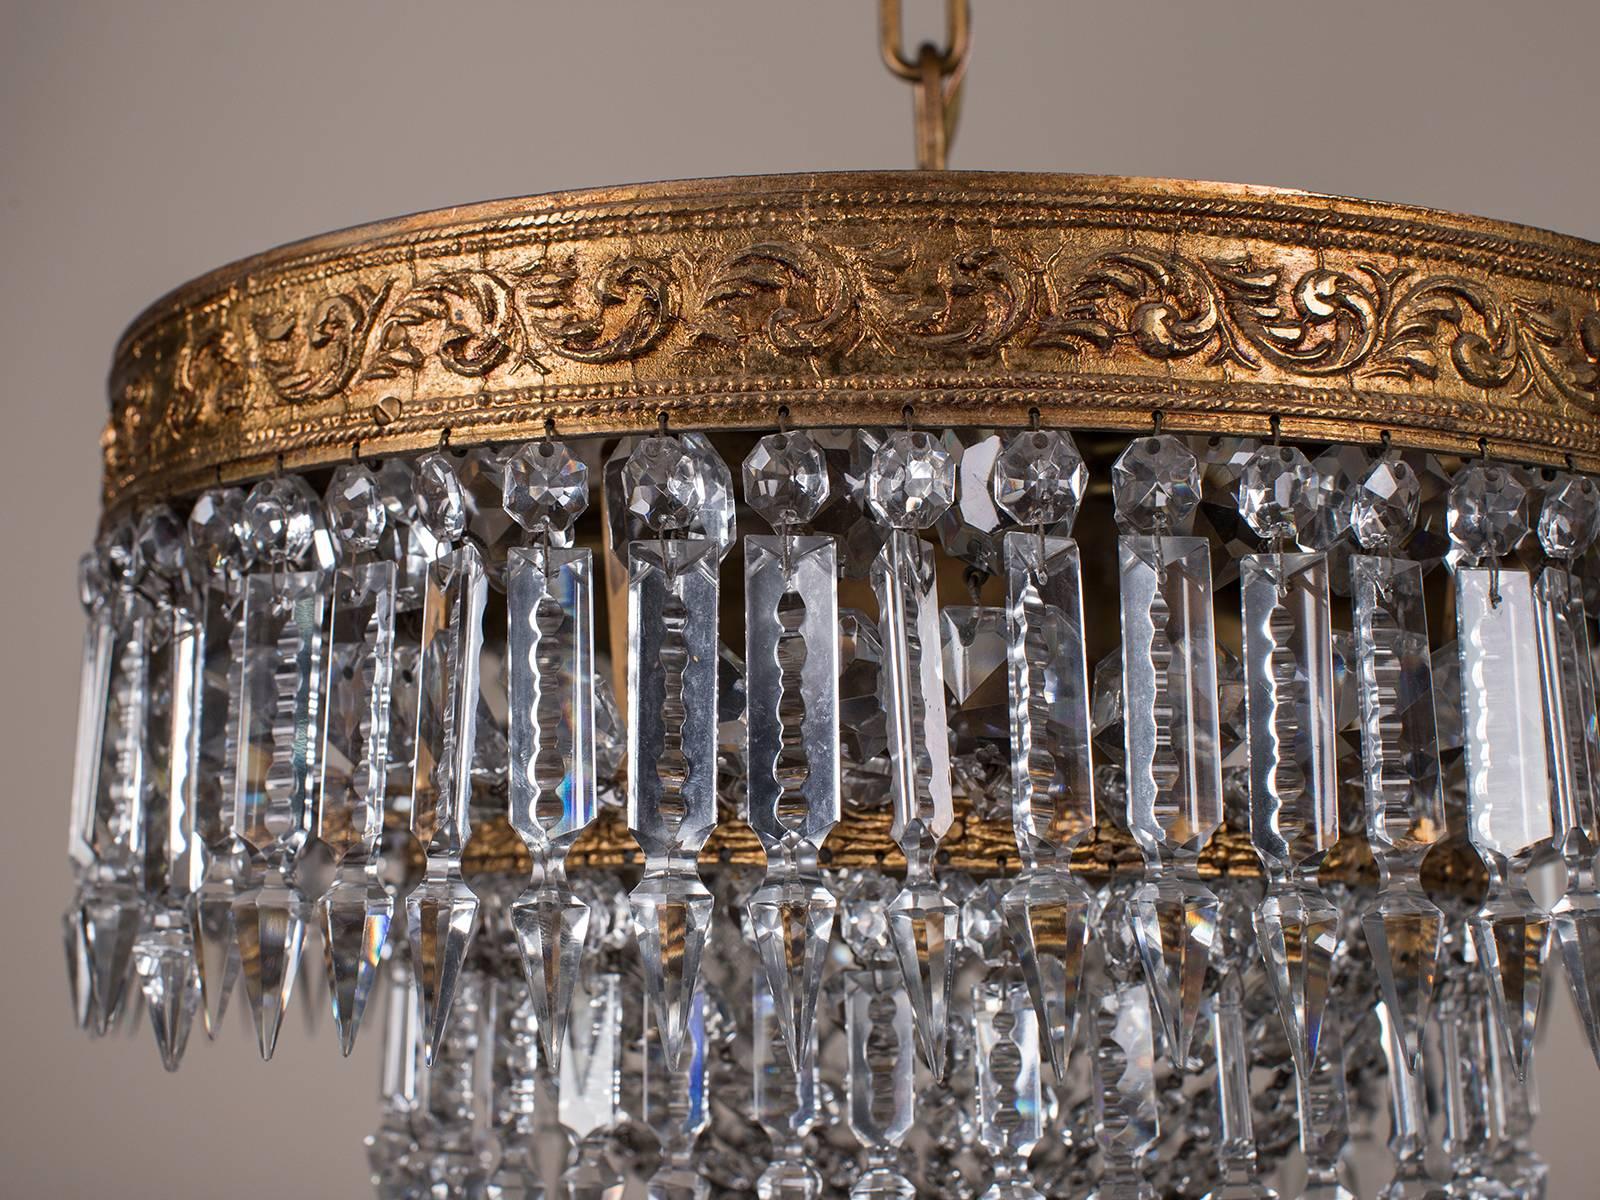 The elegant placement of the cut crystals on this antique French Empire style chandelier, circa 1900 results in an attractively tailored ceiling fixture for a modern interior. The circular hammered metal supports retain the original gilded finish